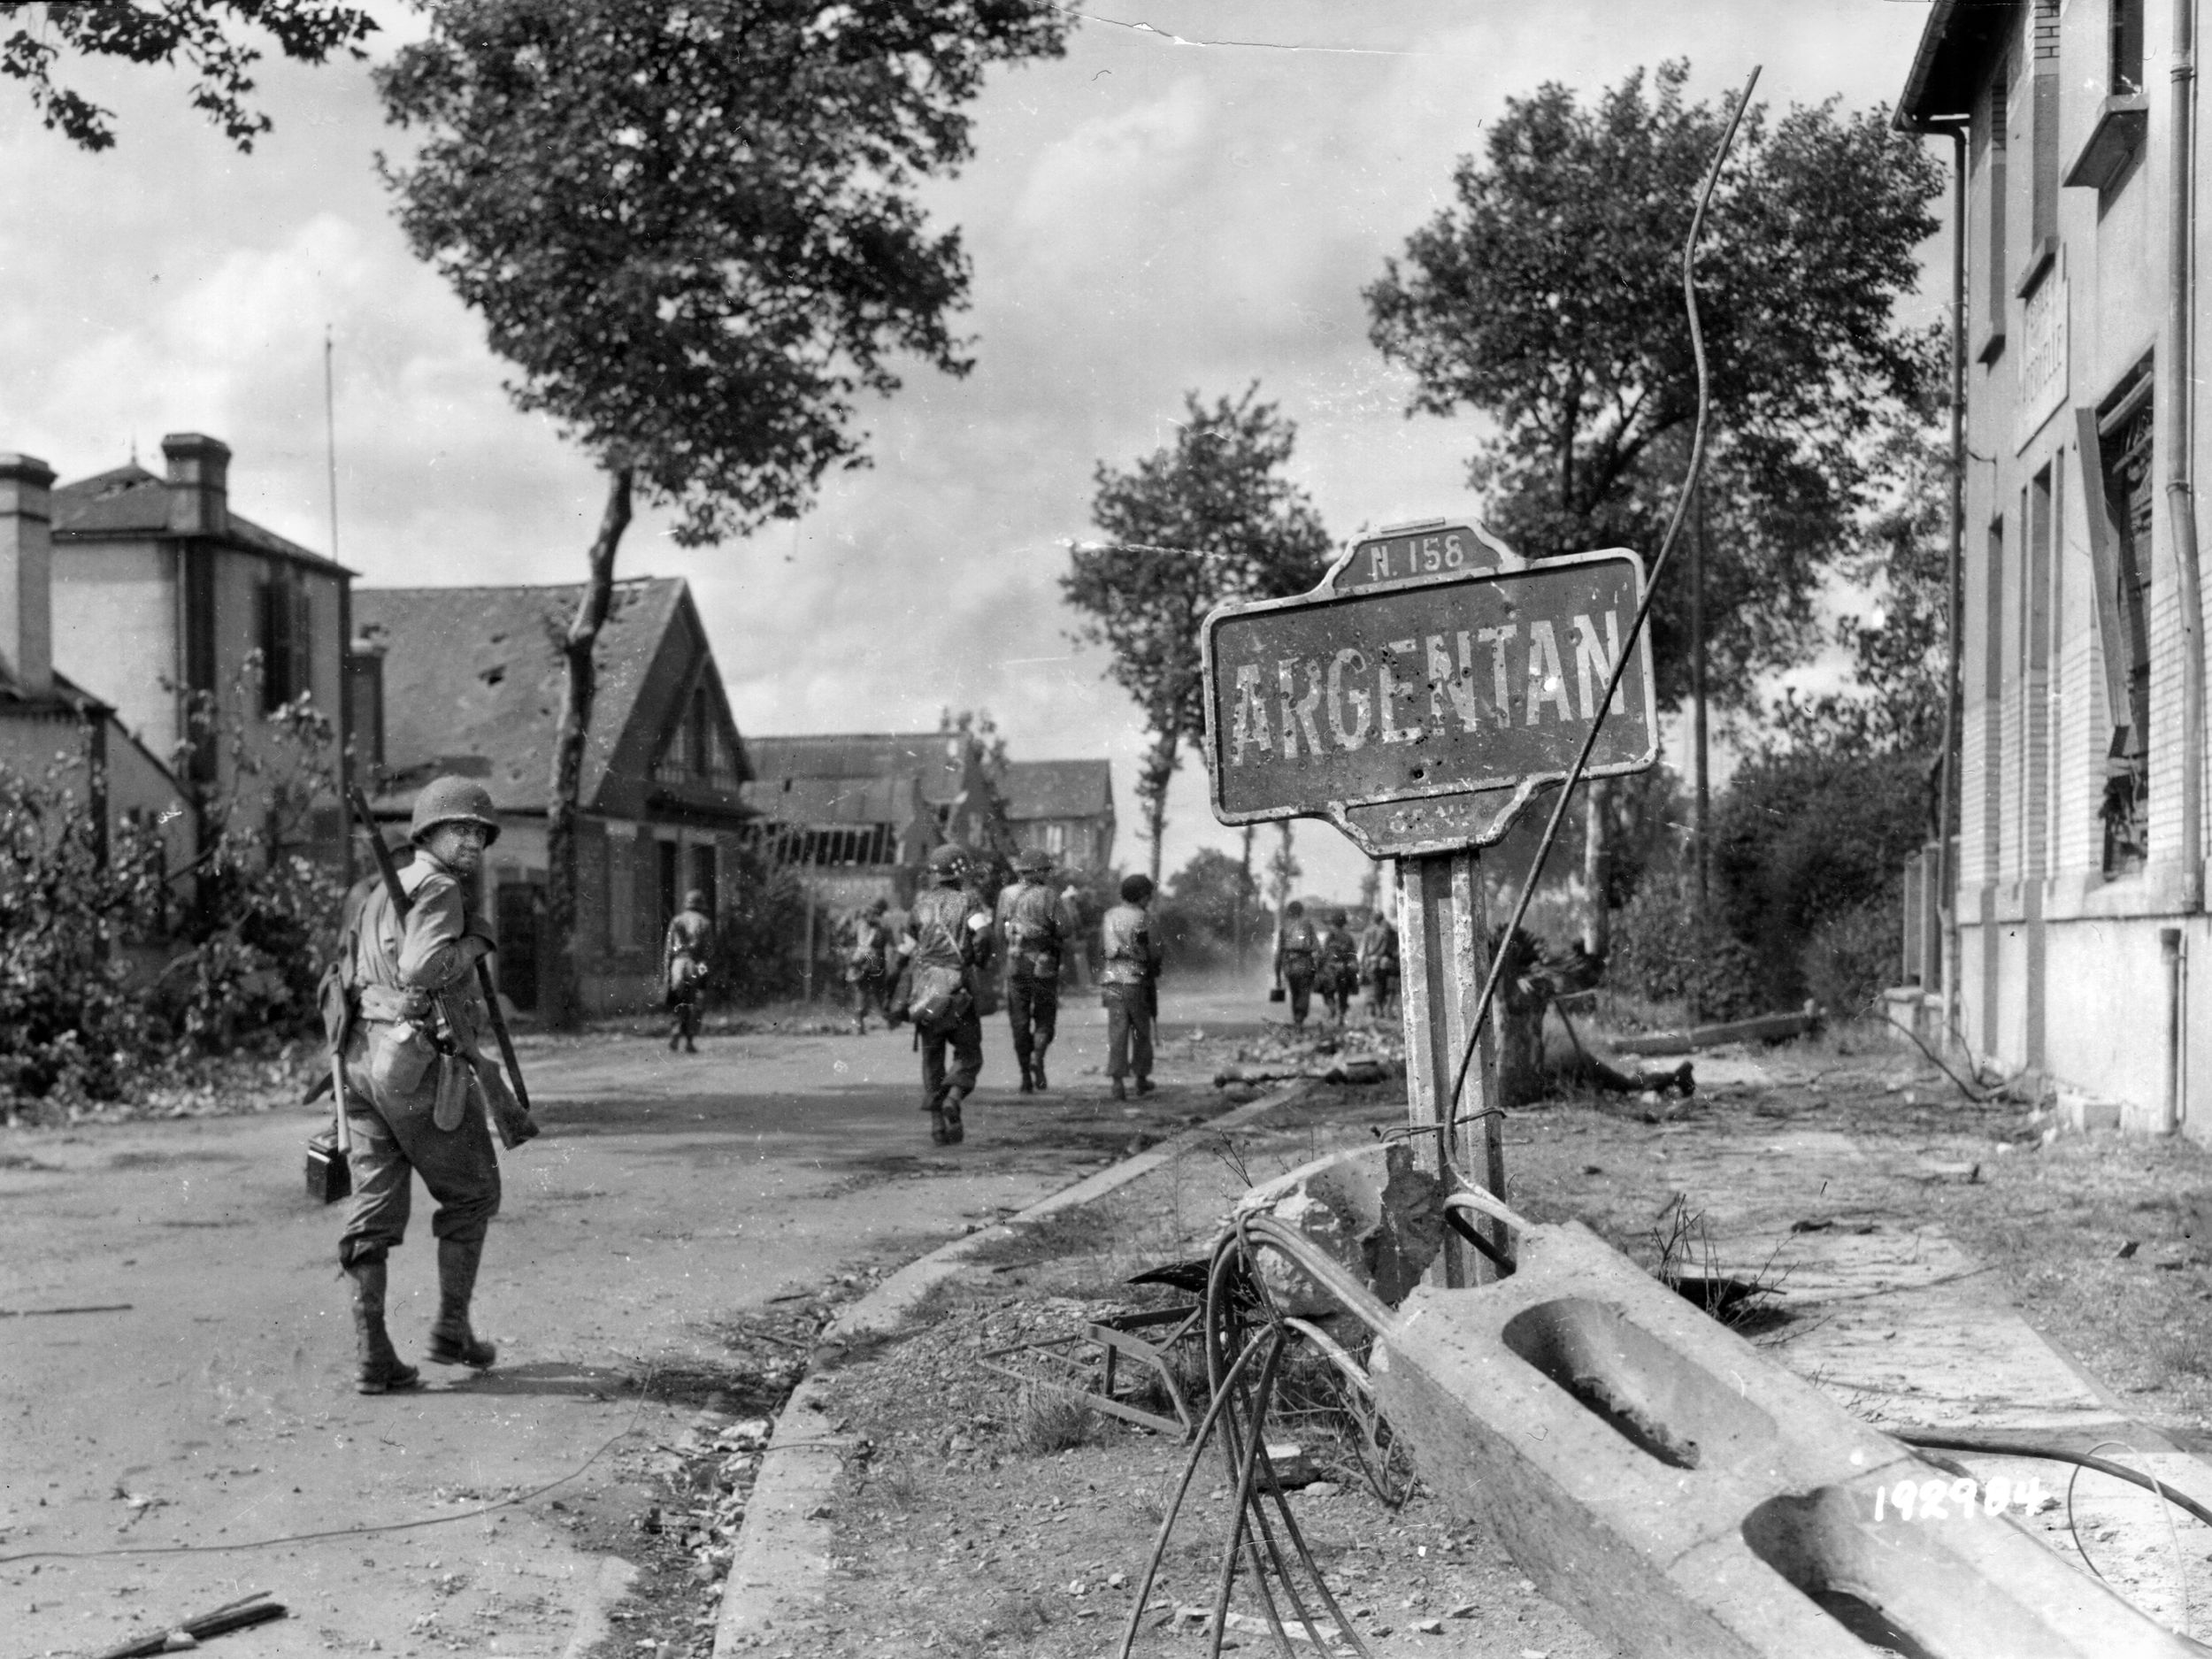 American infantrymen, probably from the 80th Division, enter the city of Argentan, France, after bitter fighting in the area. This photo was taken on August 20, 1944, as German troops were retreating during the Normandy campaign.